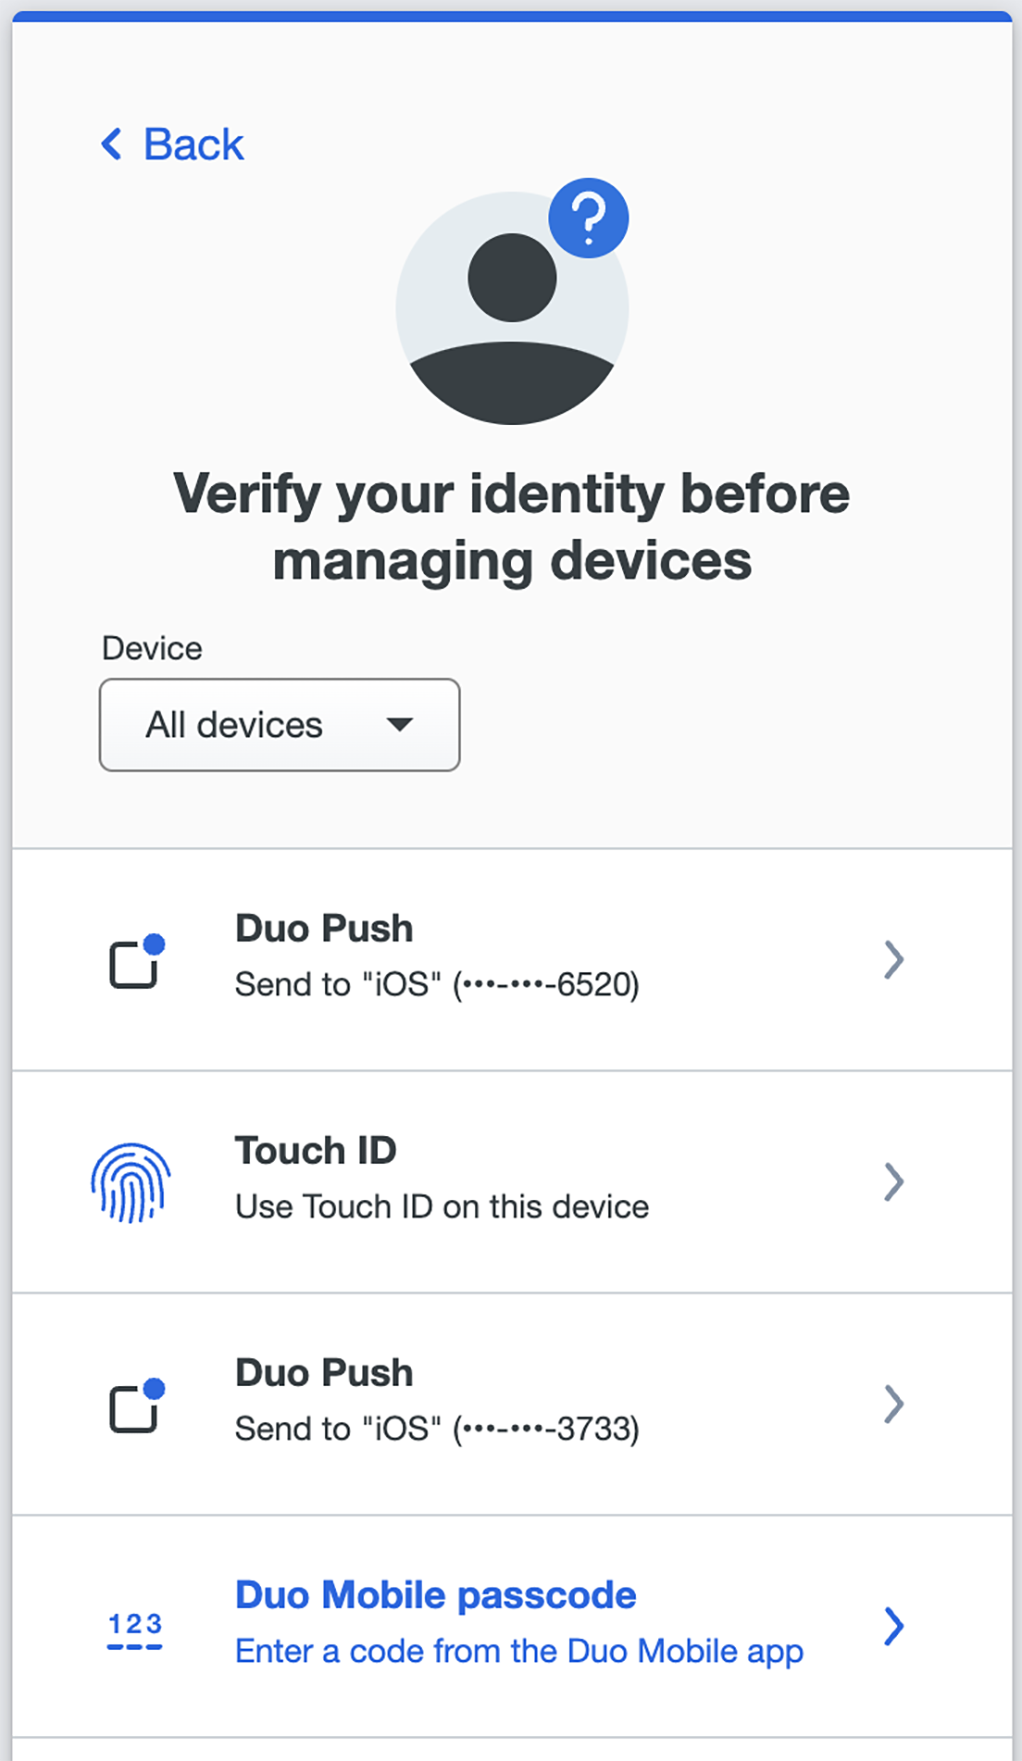 Duo-Verify-Identity.png